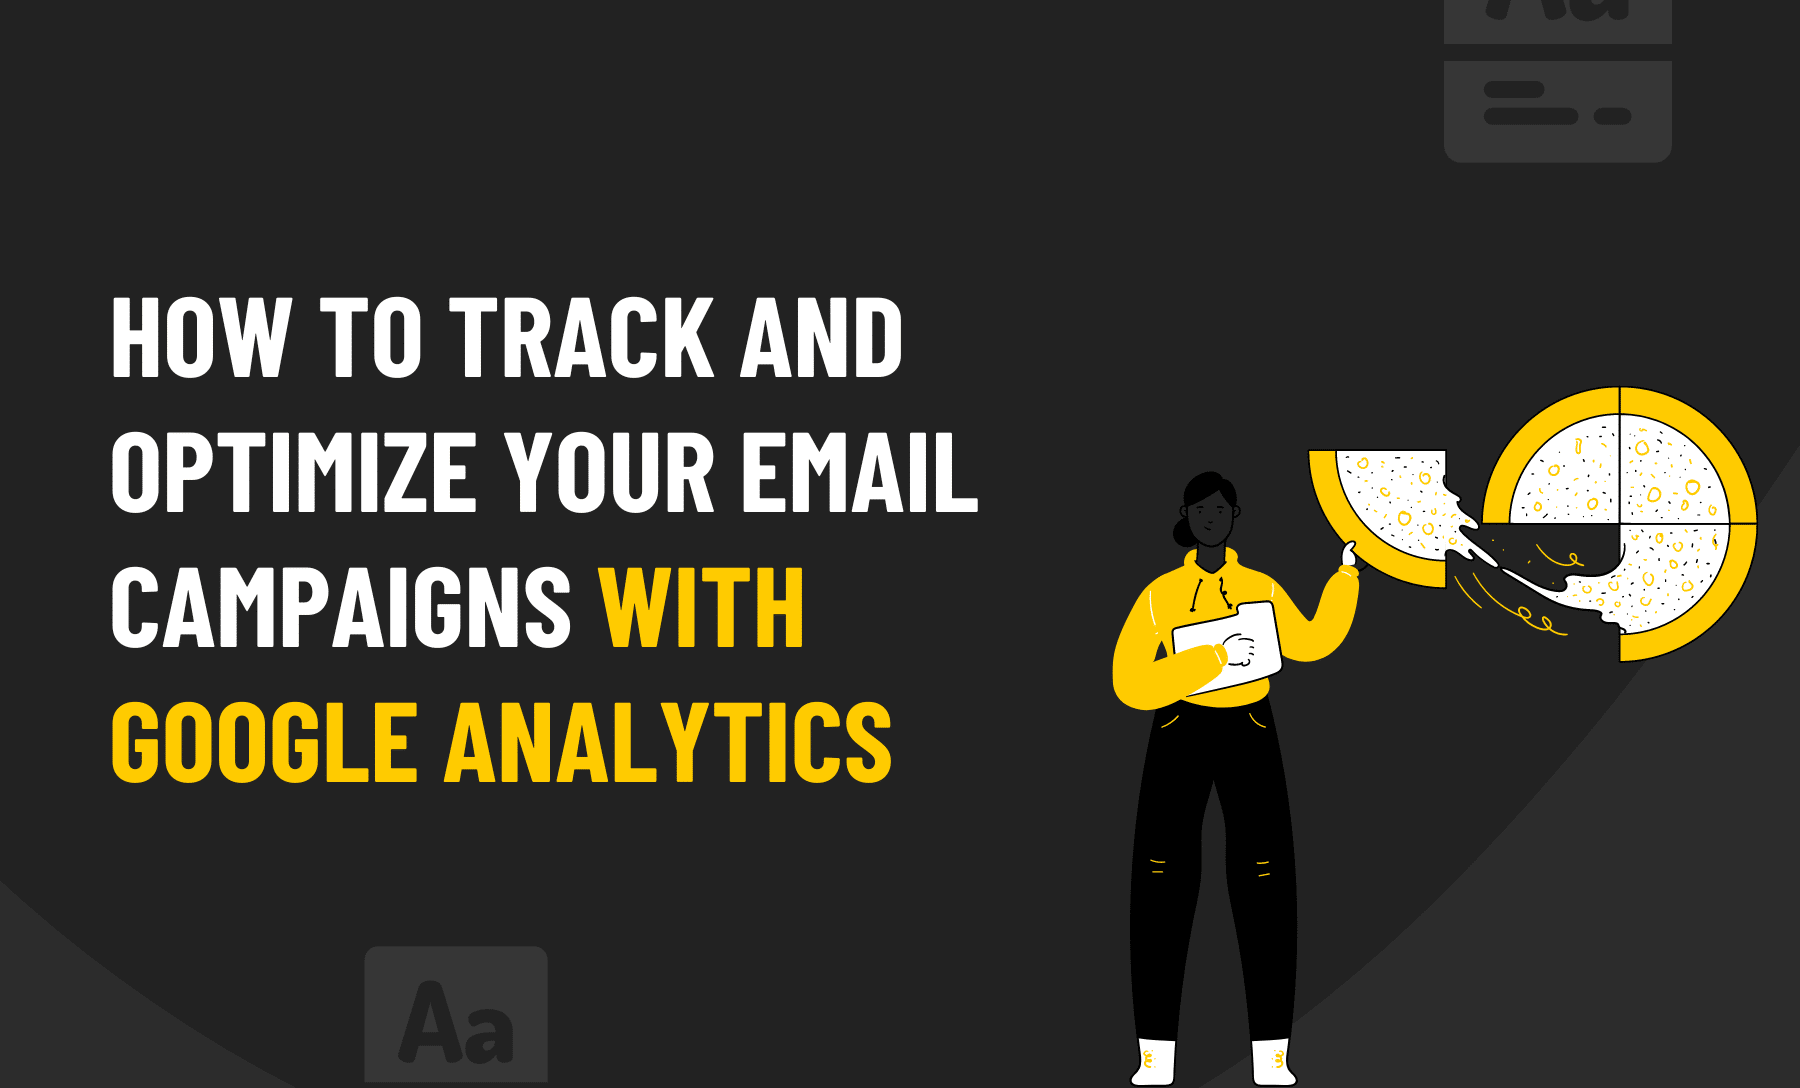 How to track and optimize your email campaign with google analytics